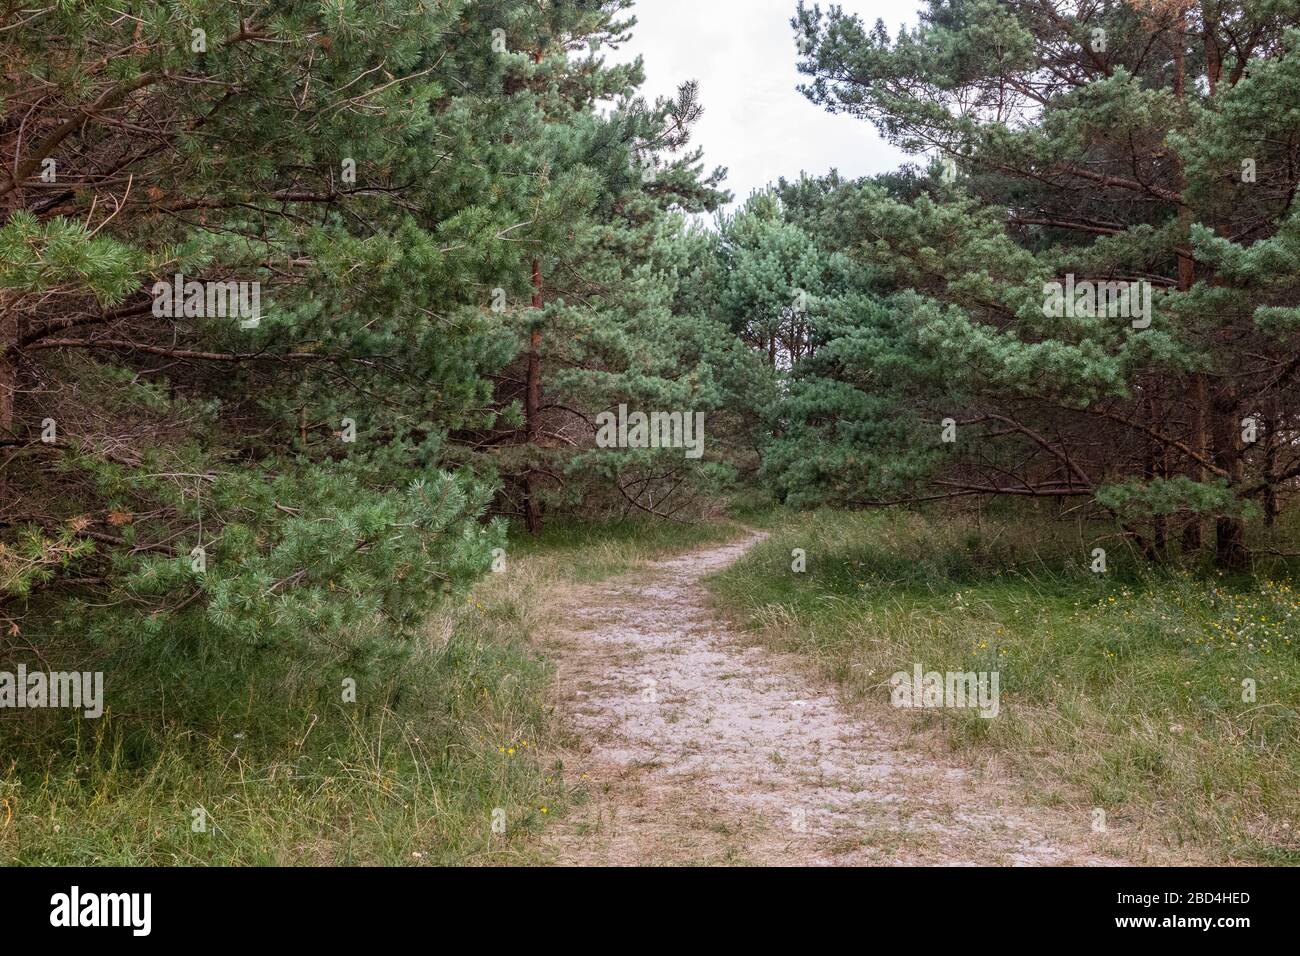 Woodland just behind the beach on the island of Rügen, Germany on the Baltic coast Stock Photo